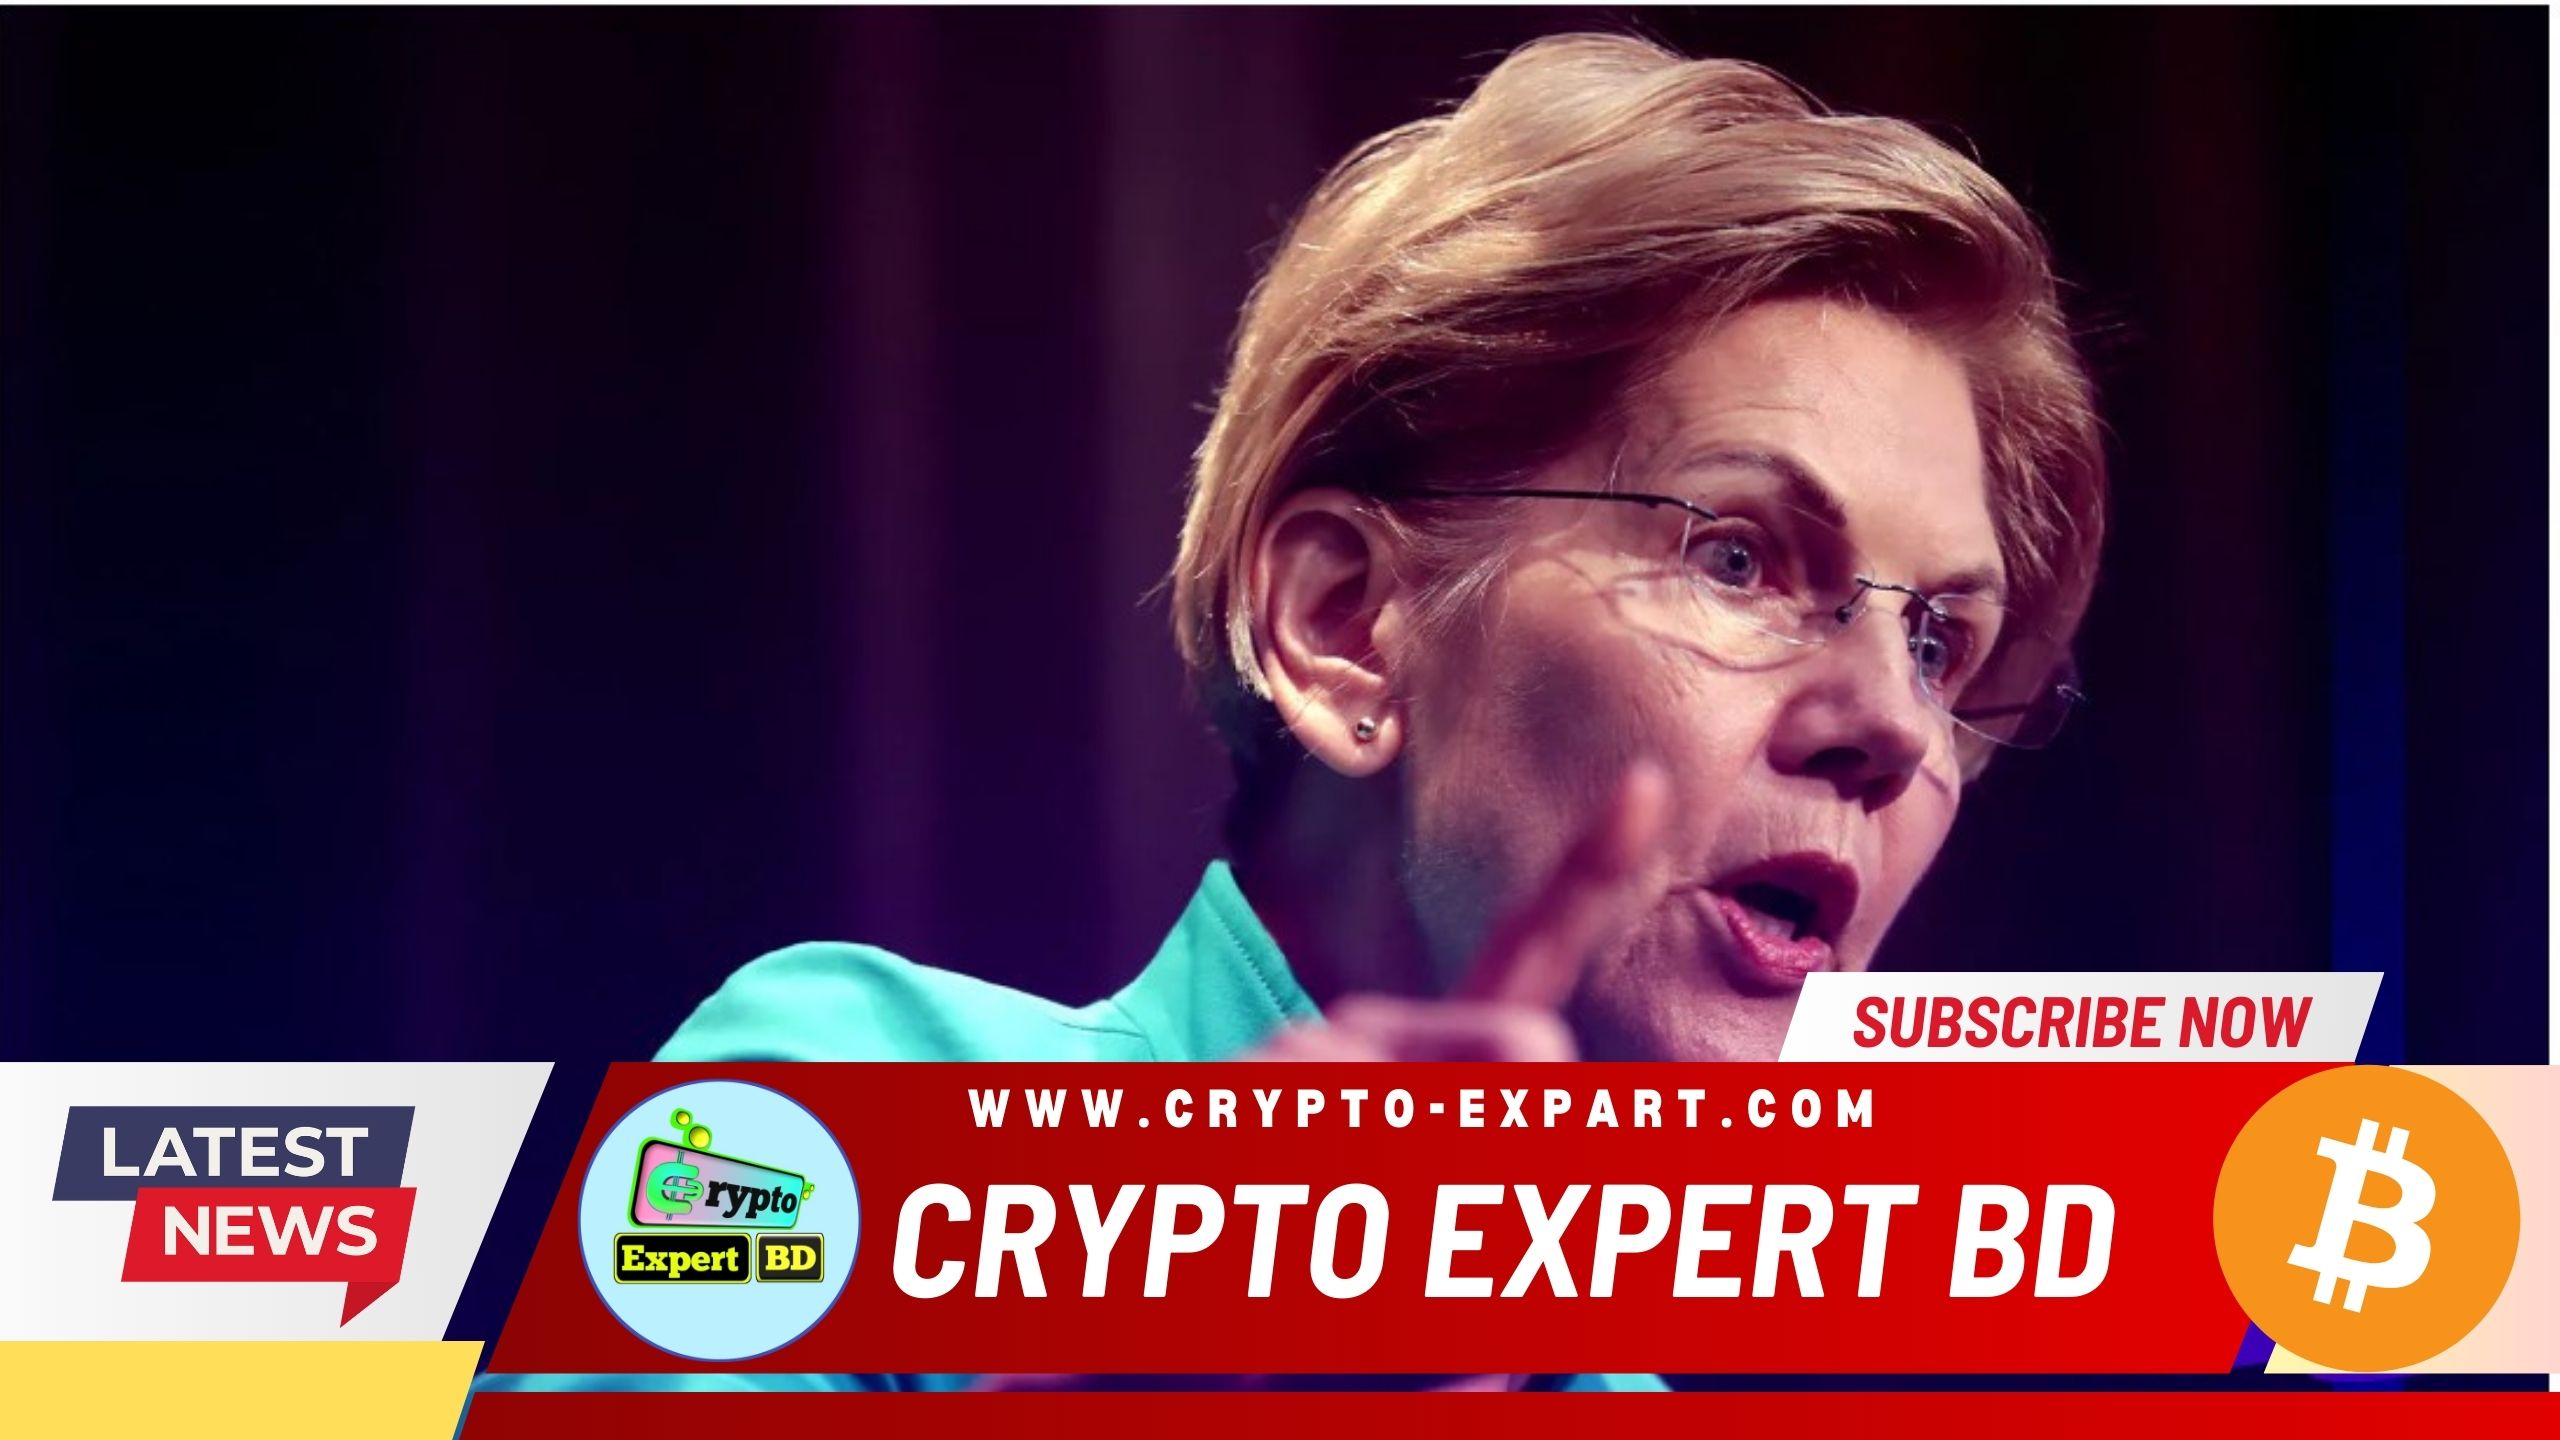 Senator Warren claims cryptocurrency companies shouldn’t collaborate with former government employees.